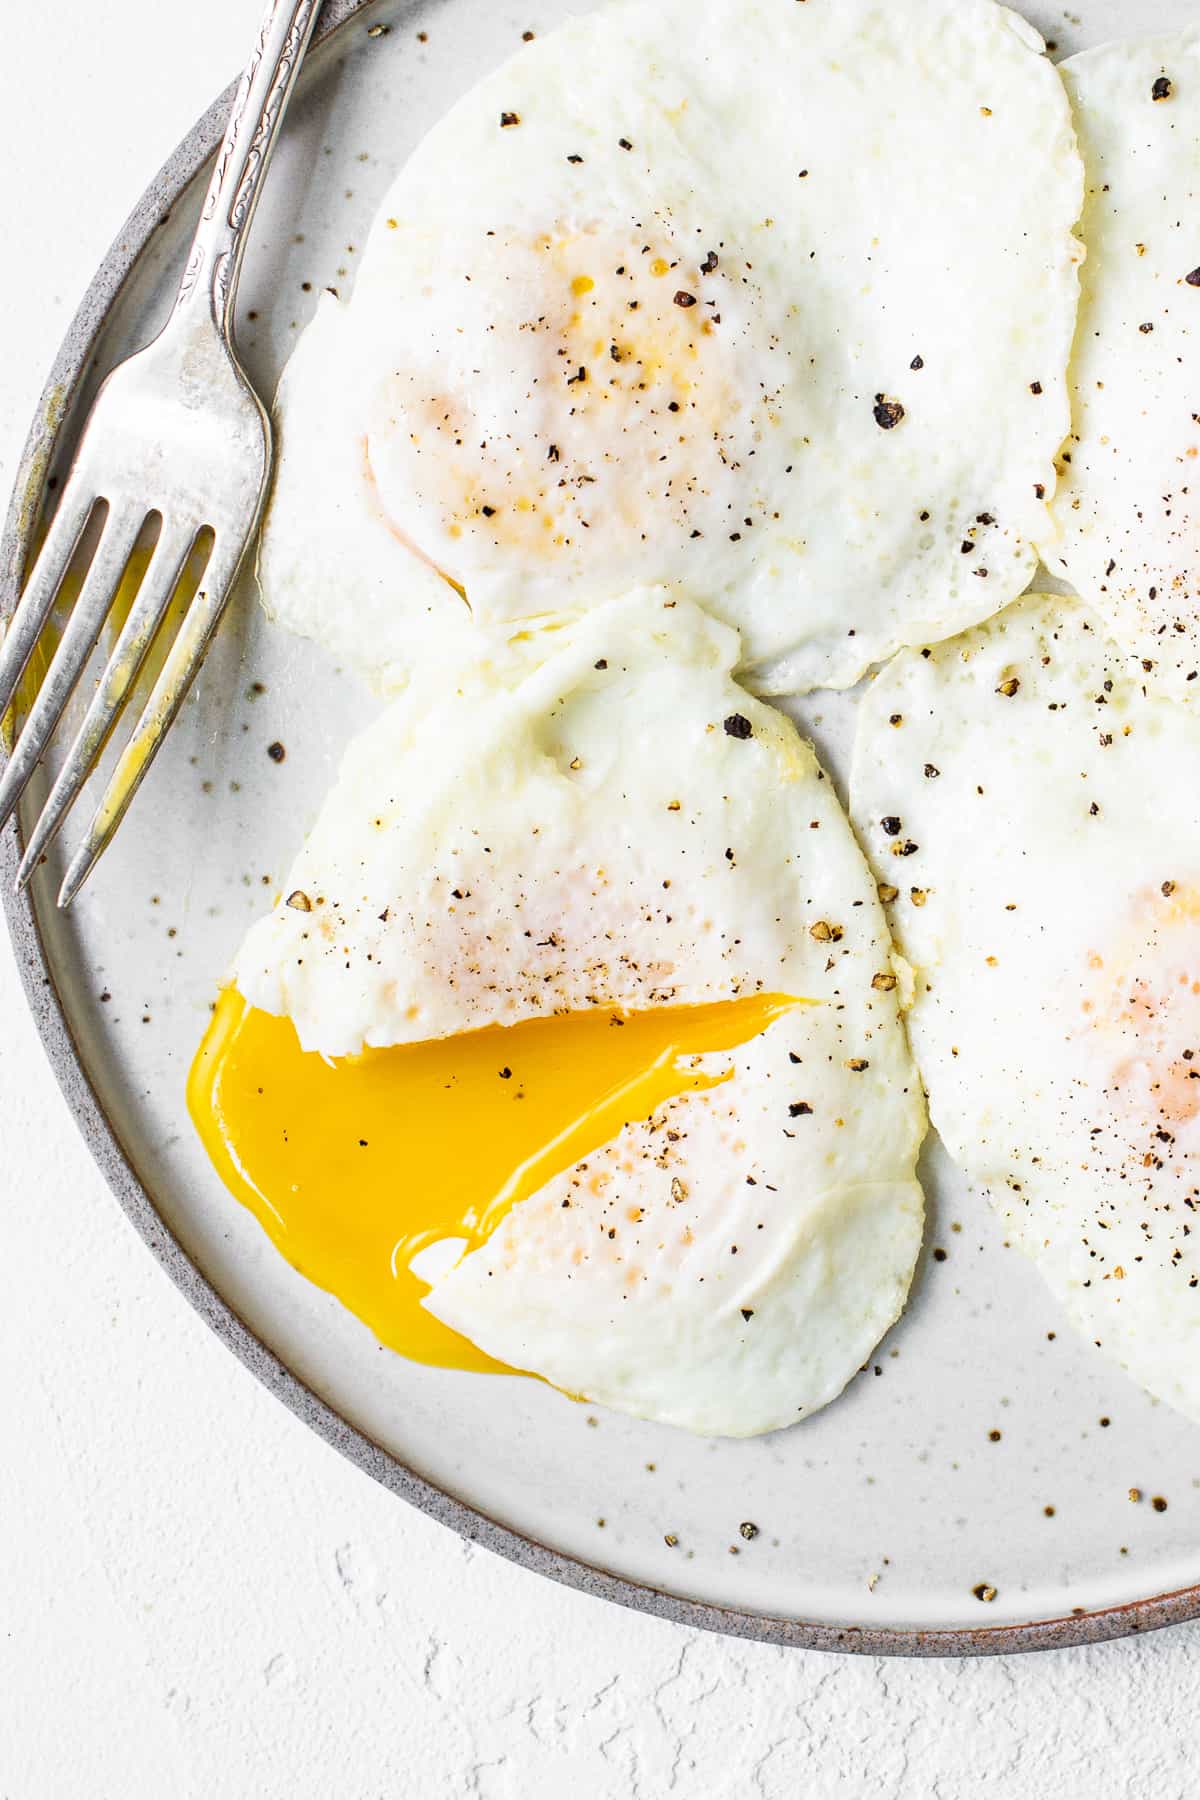 Over easy eggs on a plate with a fork.